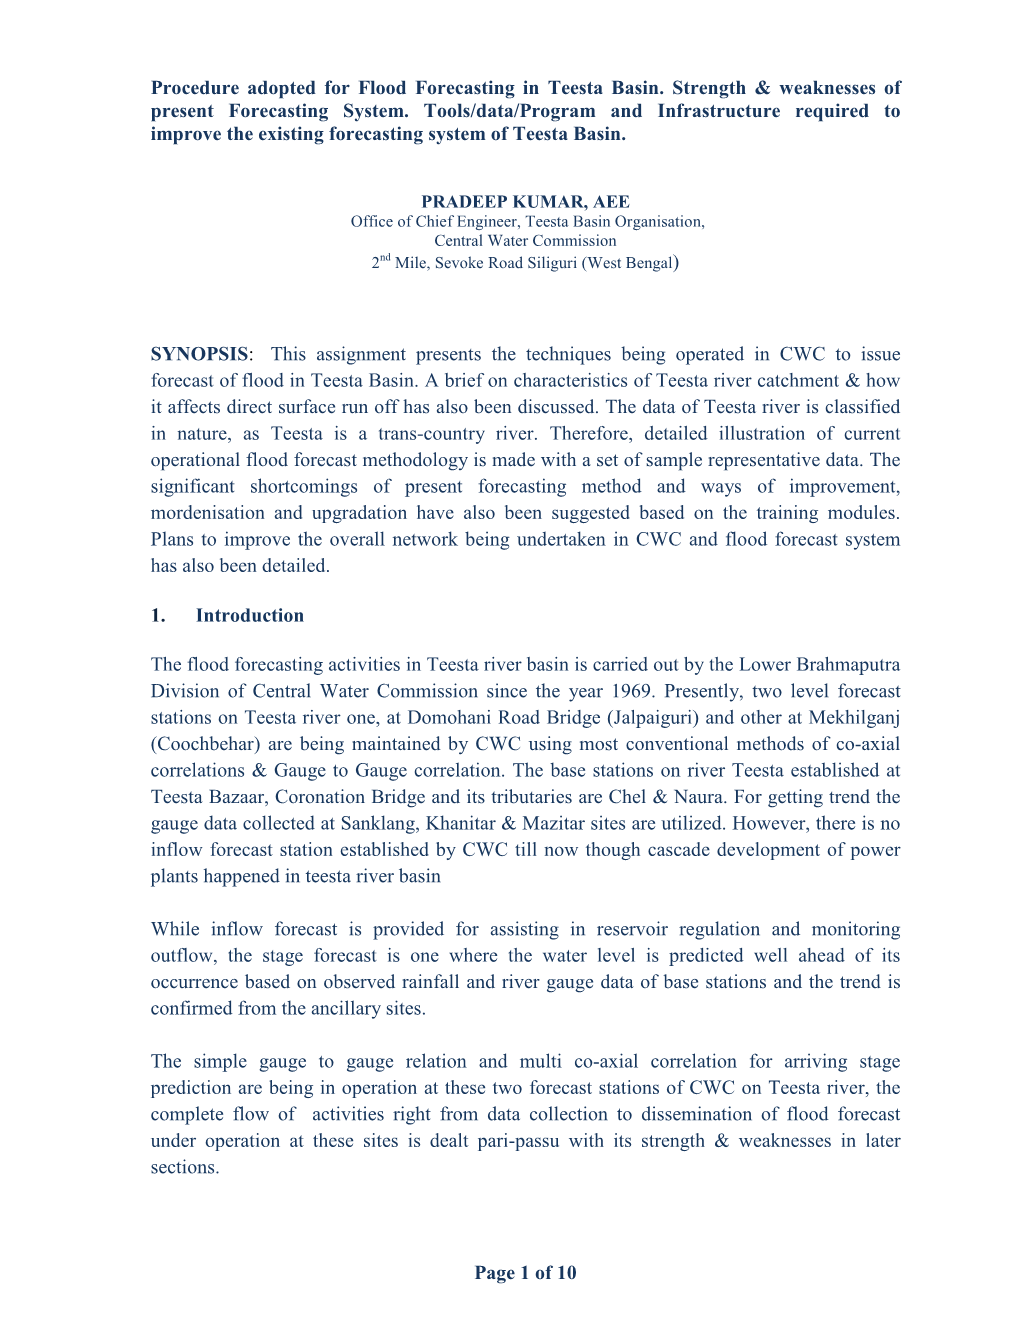 Page 1 of 10 Procedure Adopted for Flood Forecasting in Teesta Basin